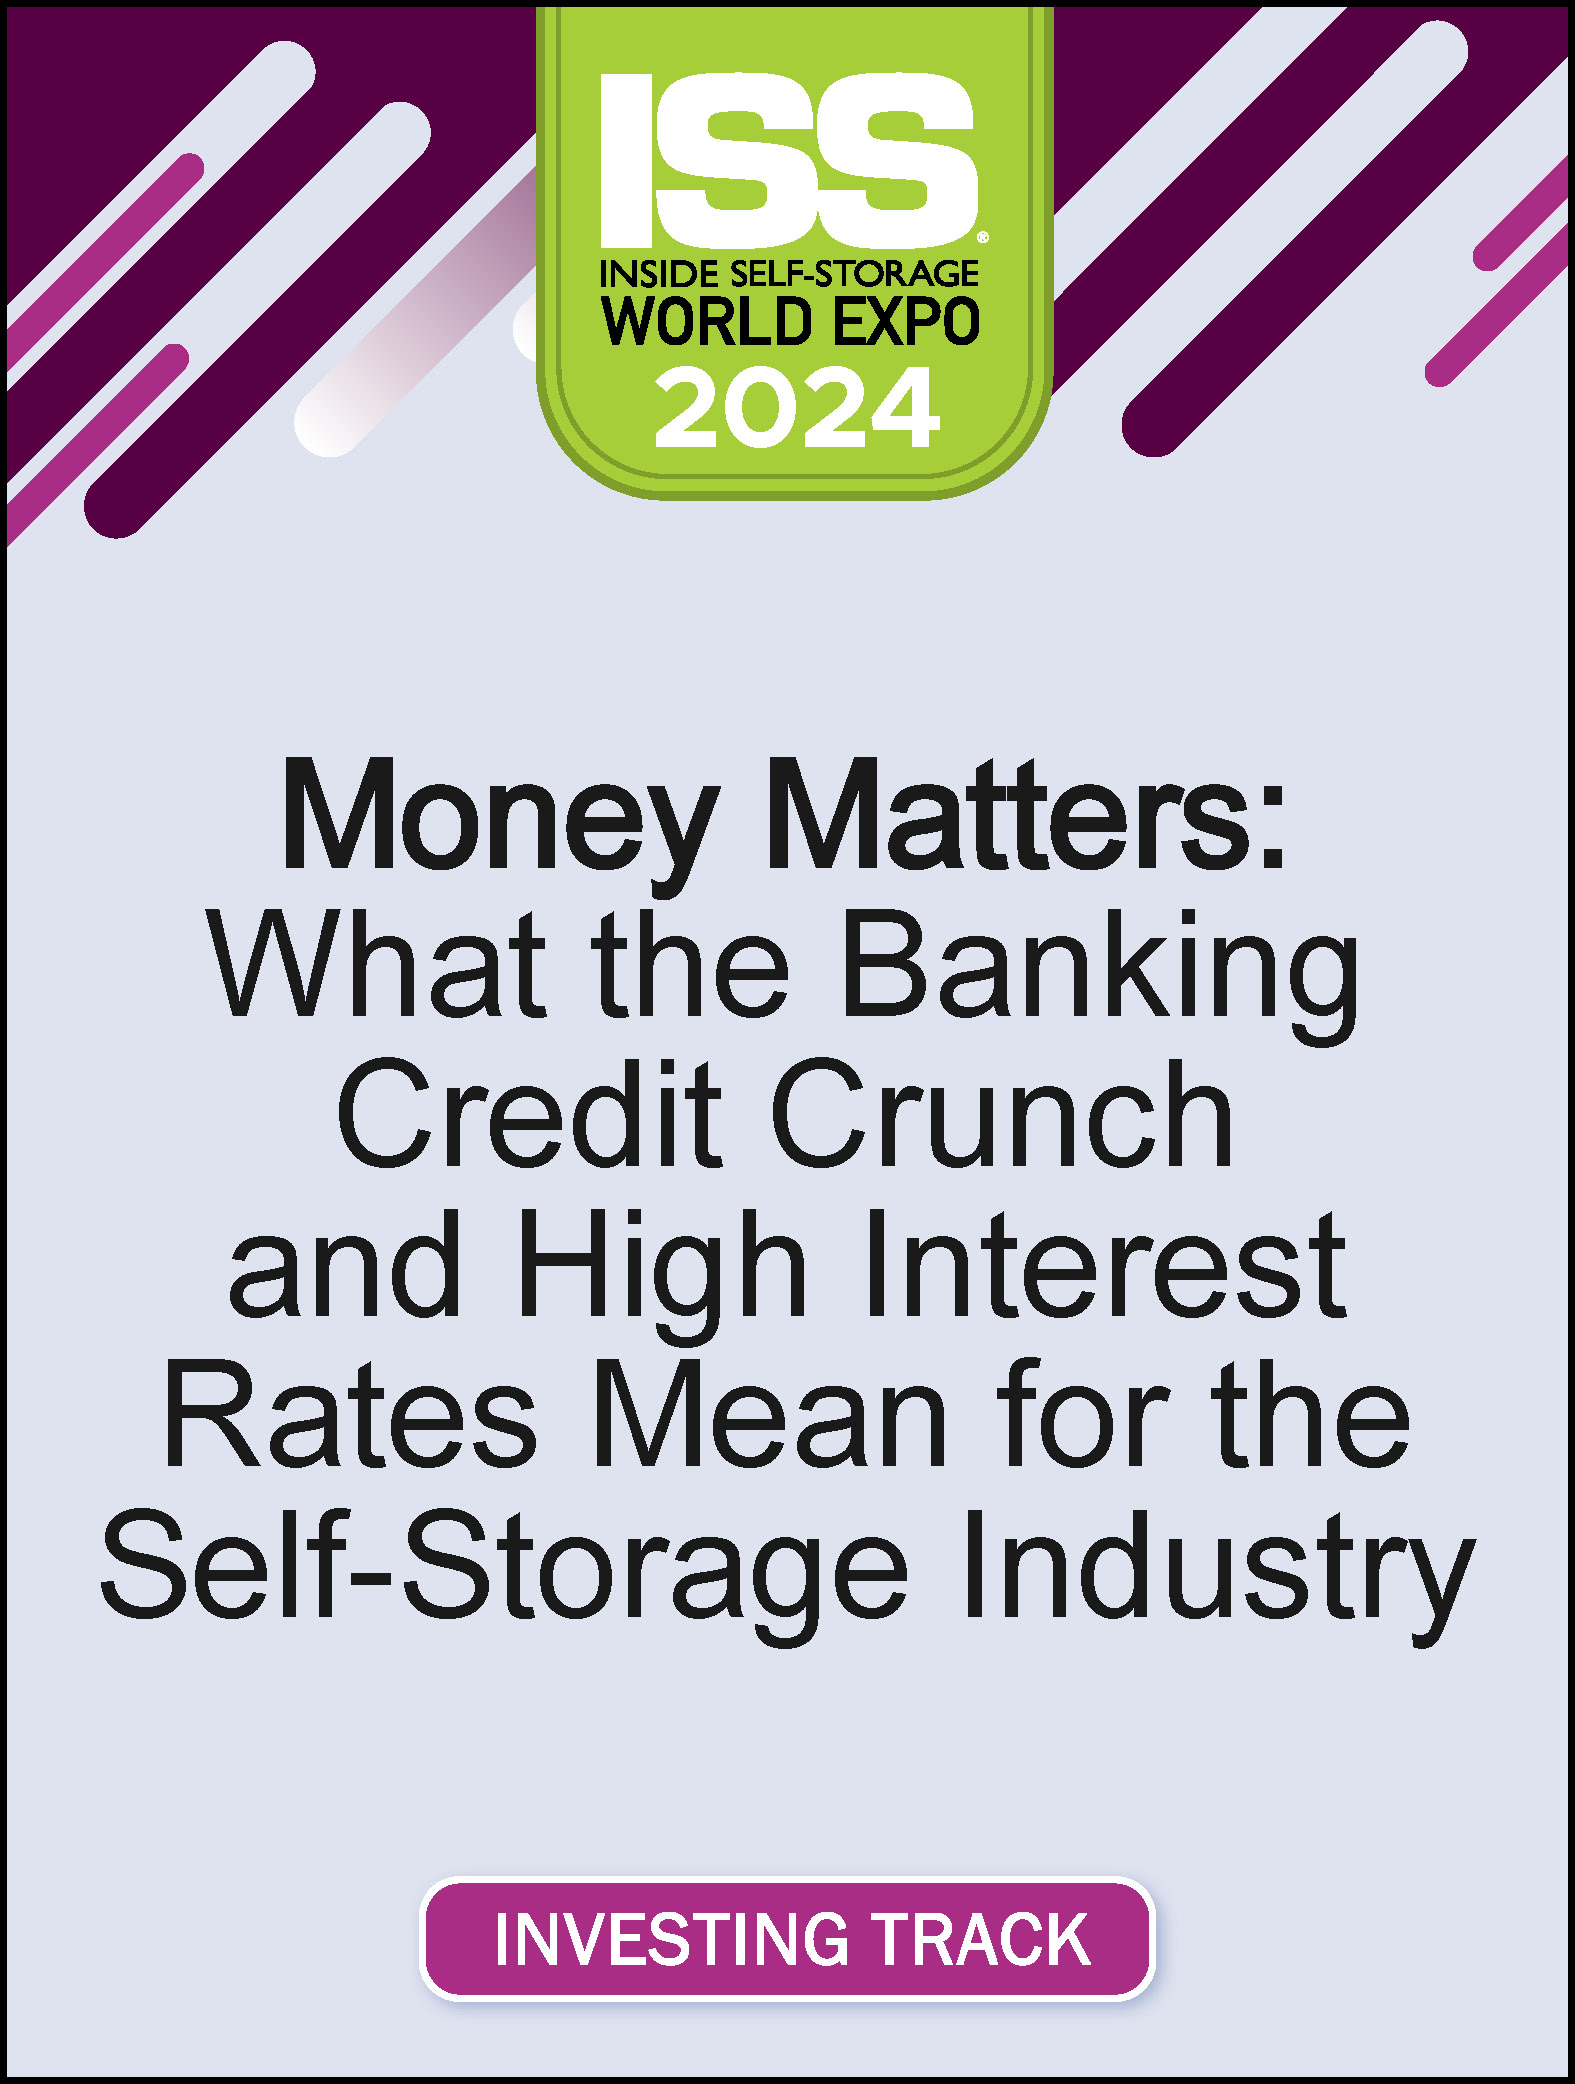 Video Pre-Order PDF - Money Matters: What the Banking Credit Crunch and High Interest Rates Mean for the Self-Storage Industry